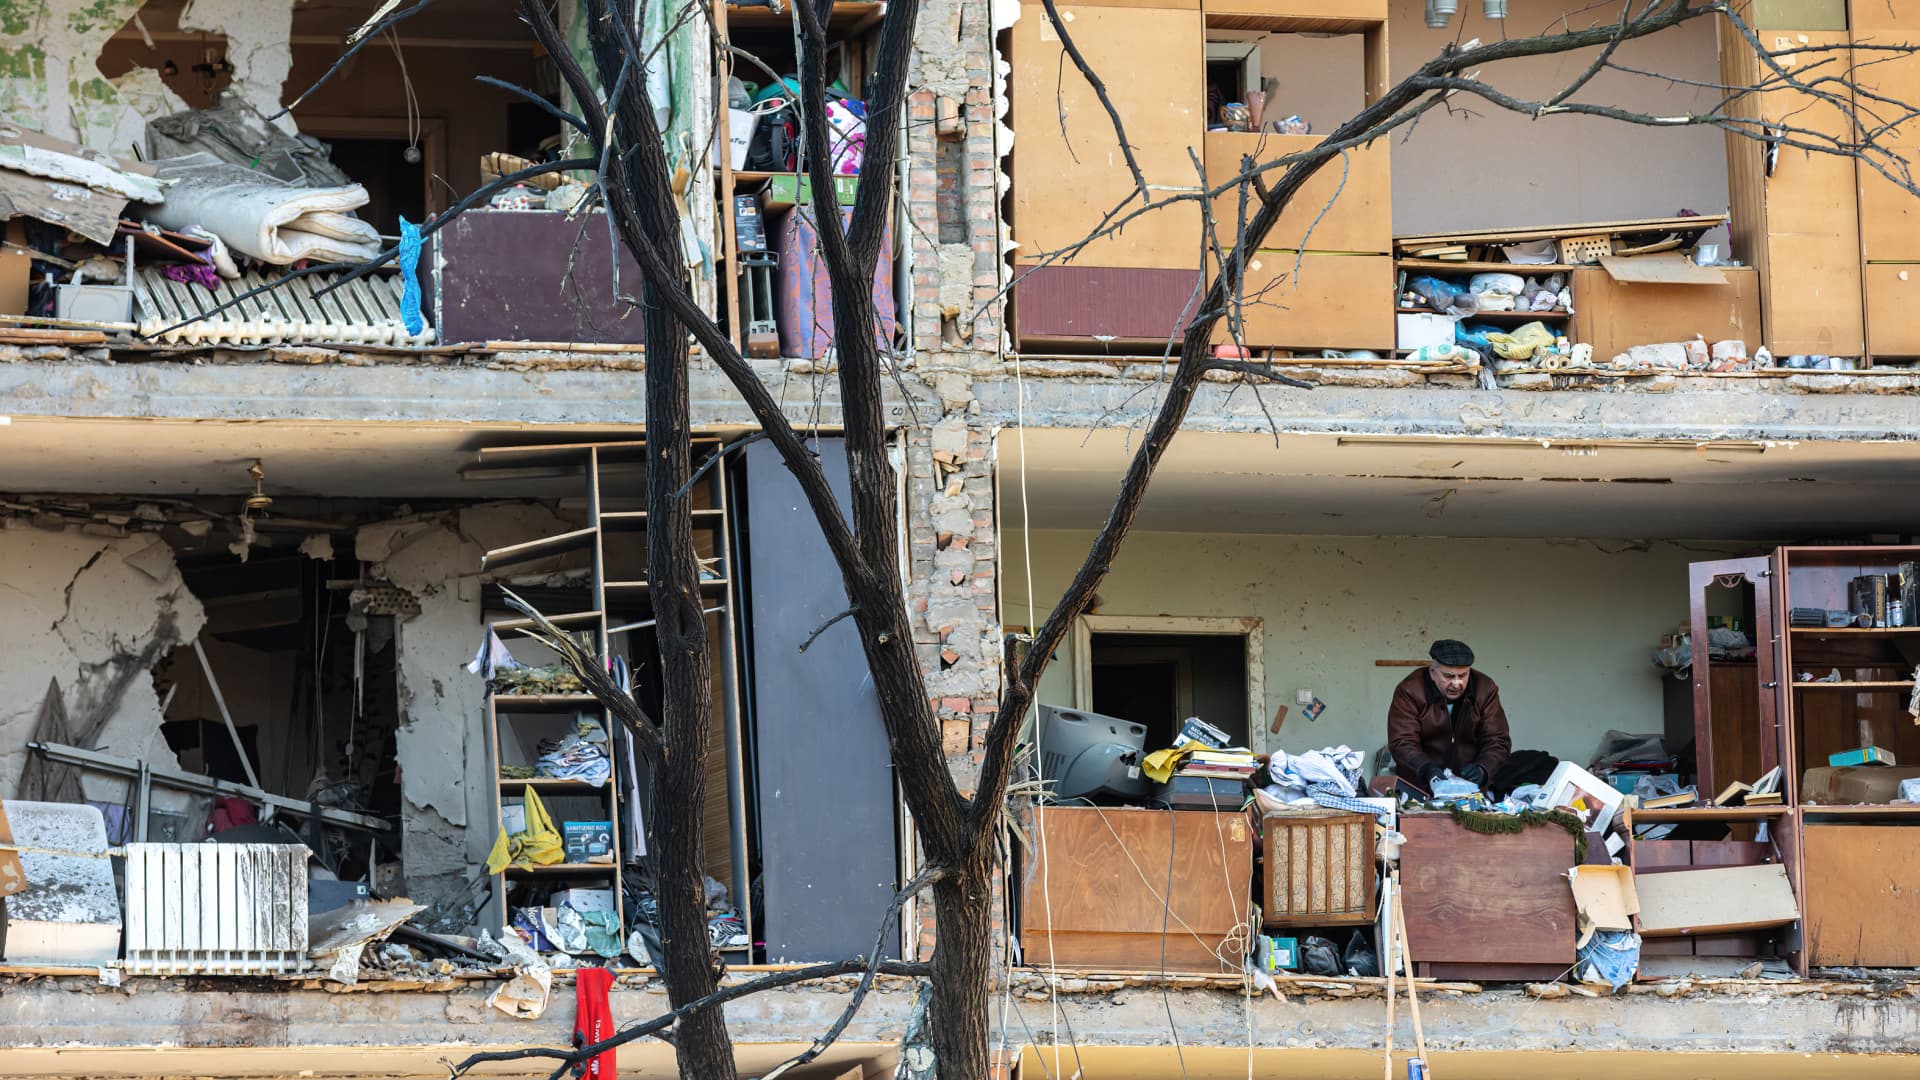 A resident seen collecting his belongings in a destroyed building.